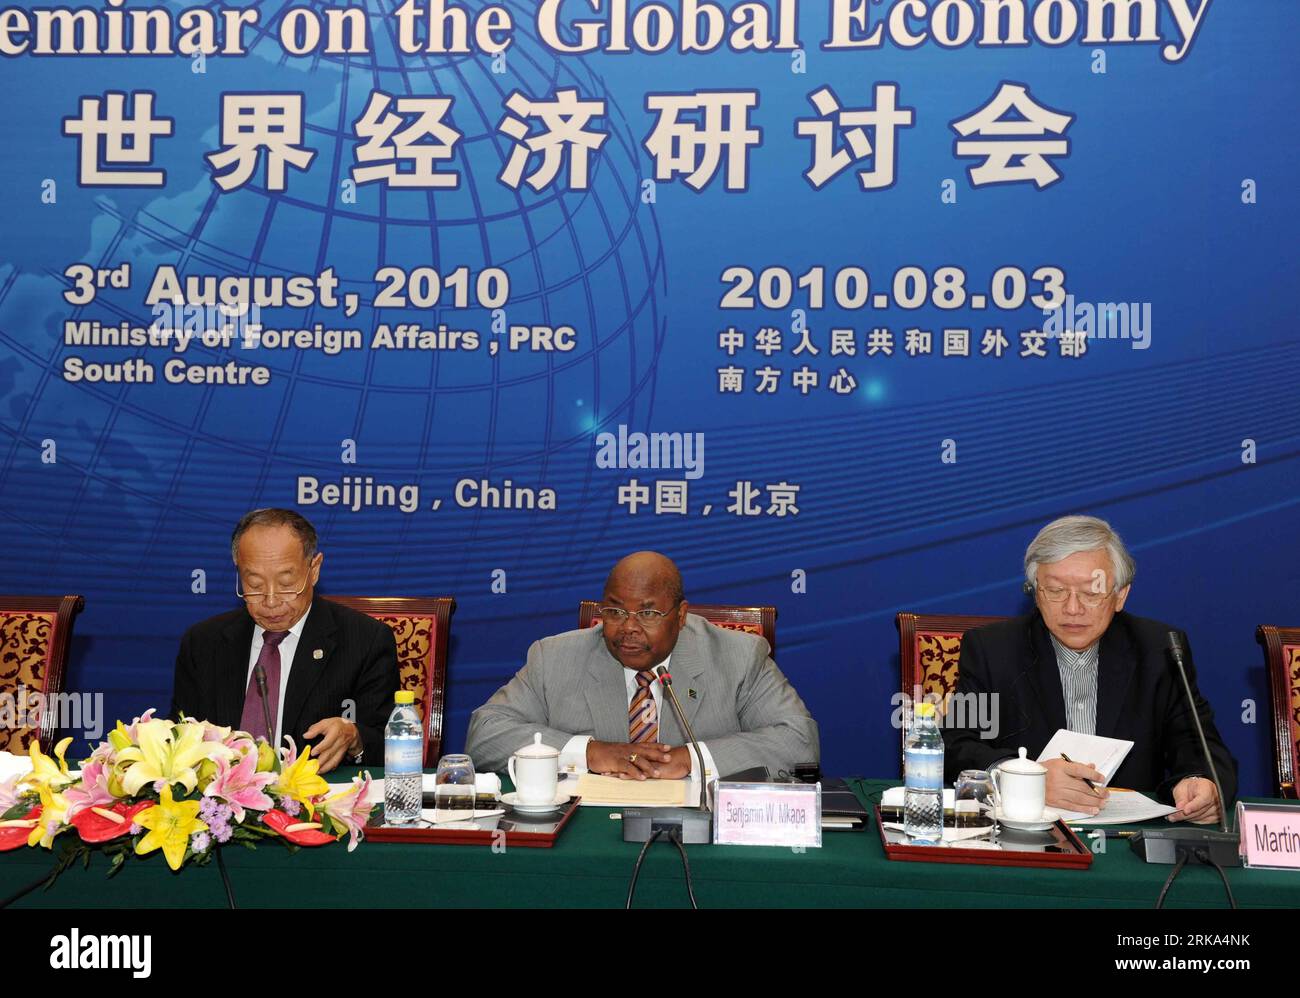 Bildnummer: 54269086  Datum: 03.08.2010  Copyright: imago/Xinhua (100803) -- BEIJING, Aug. 3, 2010 (Xinhua) -- Benjamin Mkapa (Center), chairman of the board of the South Centre, attends the opening ceremony of the Seminar on the Global Economy, co-hosted by the Ministry of Foreign Affairs of the  s Republic of China and the South Center in Beijing, capital of China, Aug. 3, 2010. (Xinhua/Rao Aimin) (wy) (1)CHINA-BEIJING-SEMINAR-GLOBAL ECONOMY (CN) PUBLICATIONxNOTxINxCHN Politik People kbdig xng 2010 quer    Bildnummer 54269086 Date 03 08 2010 Copyright Imago XINHUA  Beijing Aug 3 2010 XINHUA Stock Photo